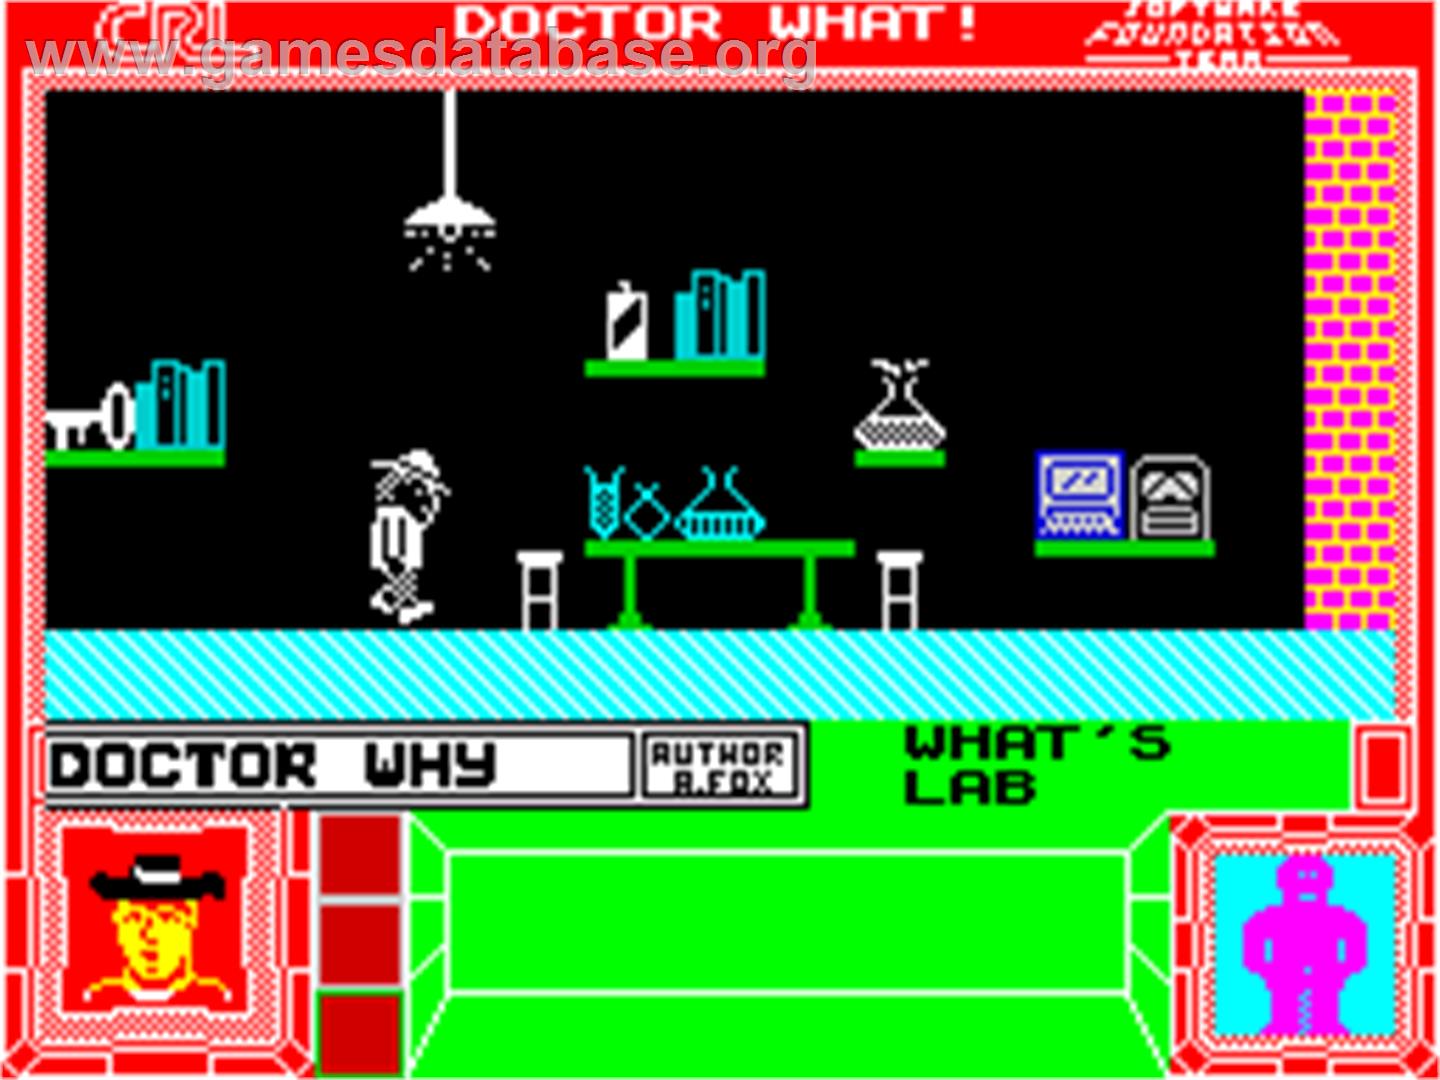 Doctor What! - Sinclair ZX Spectrum - Artwork - In Game